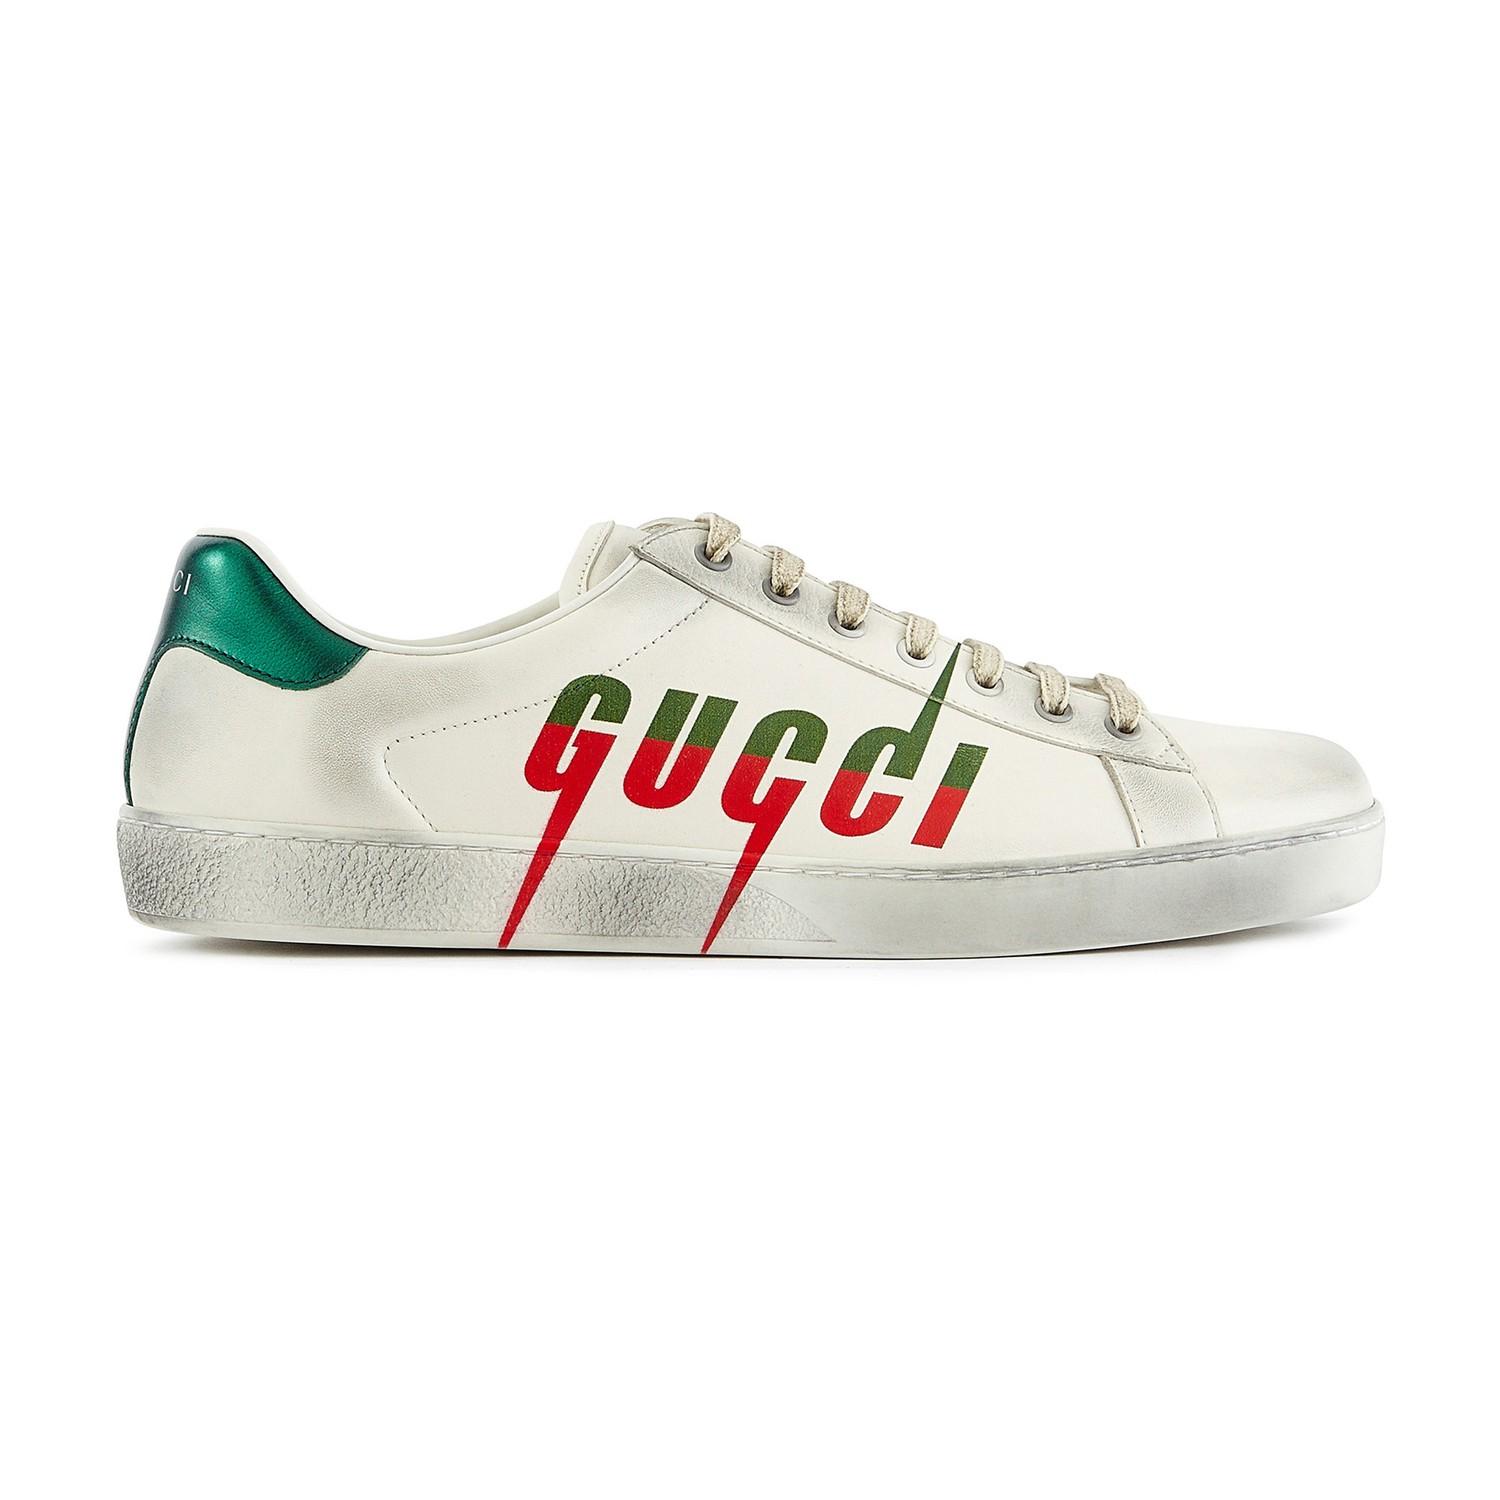 Gucci Denim New Ace Blade Trainers in White for Men - Lyst